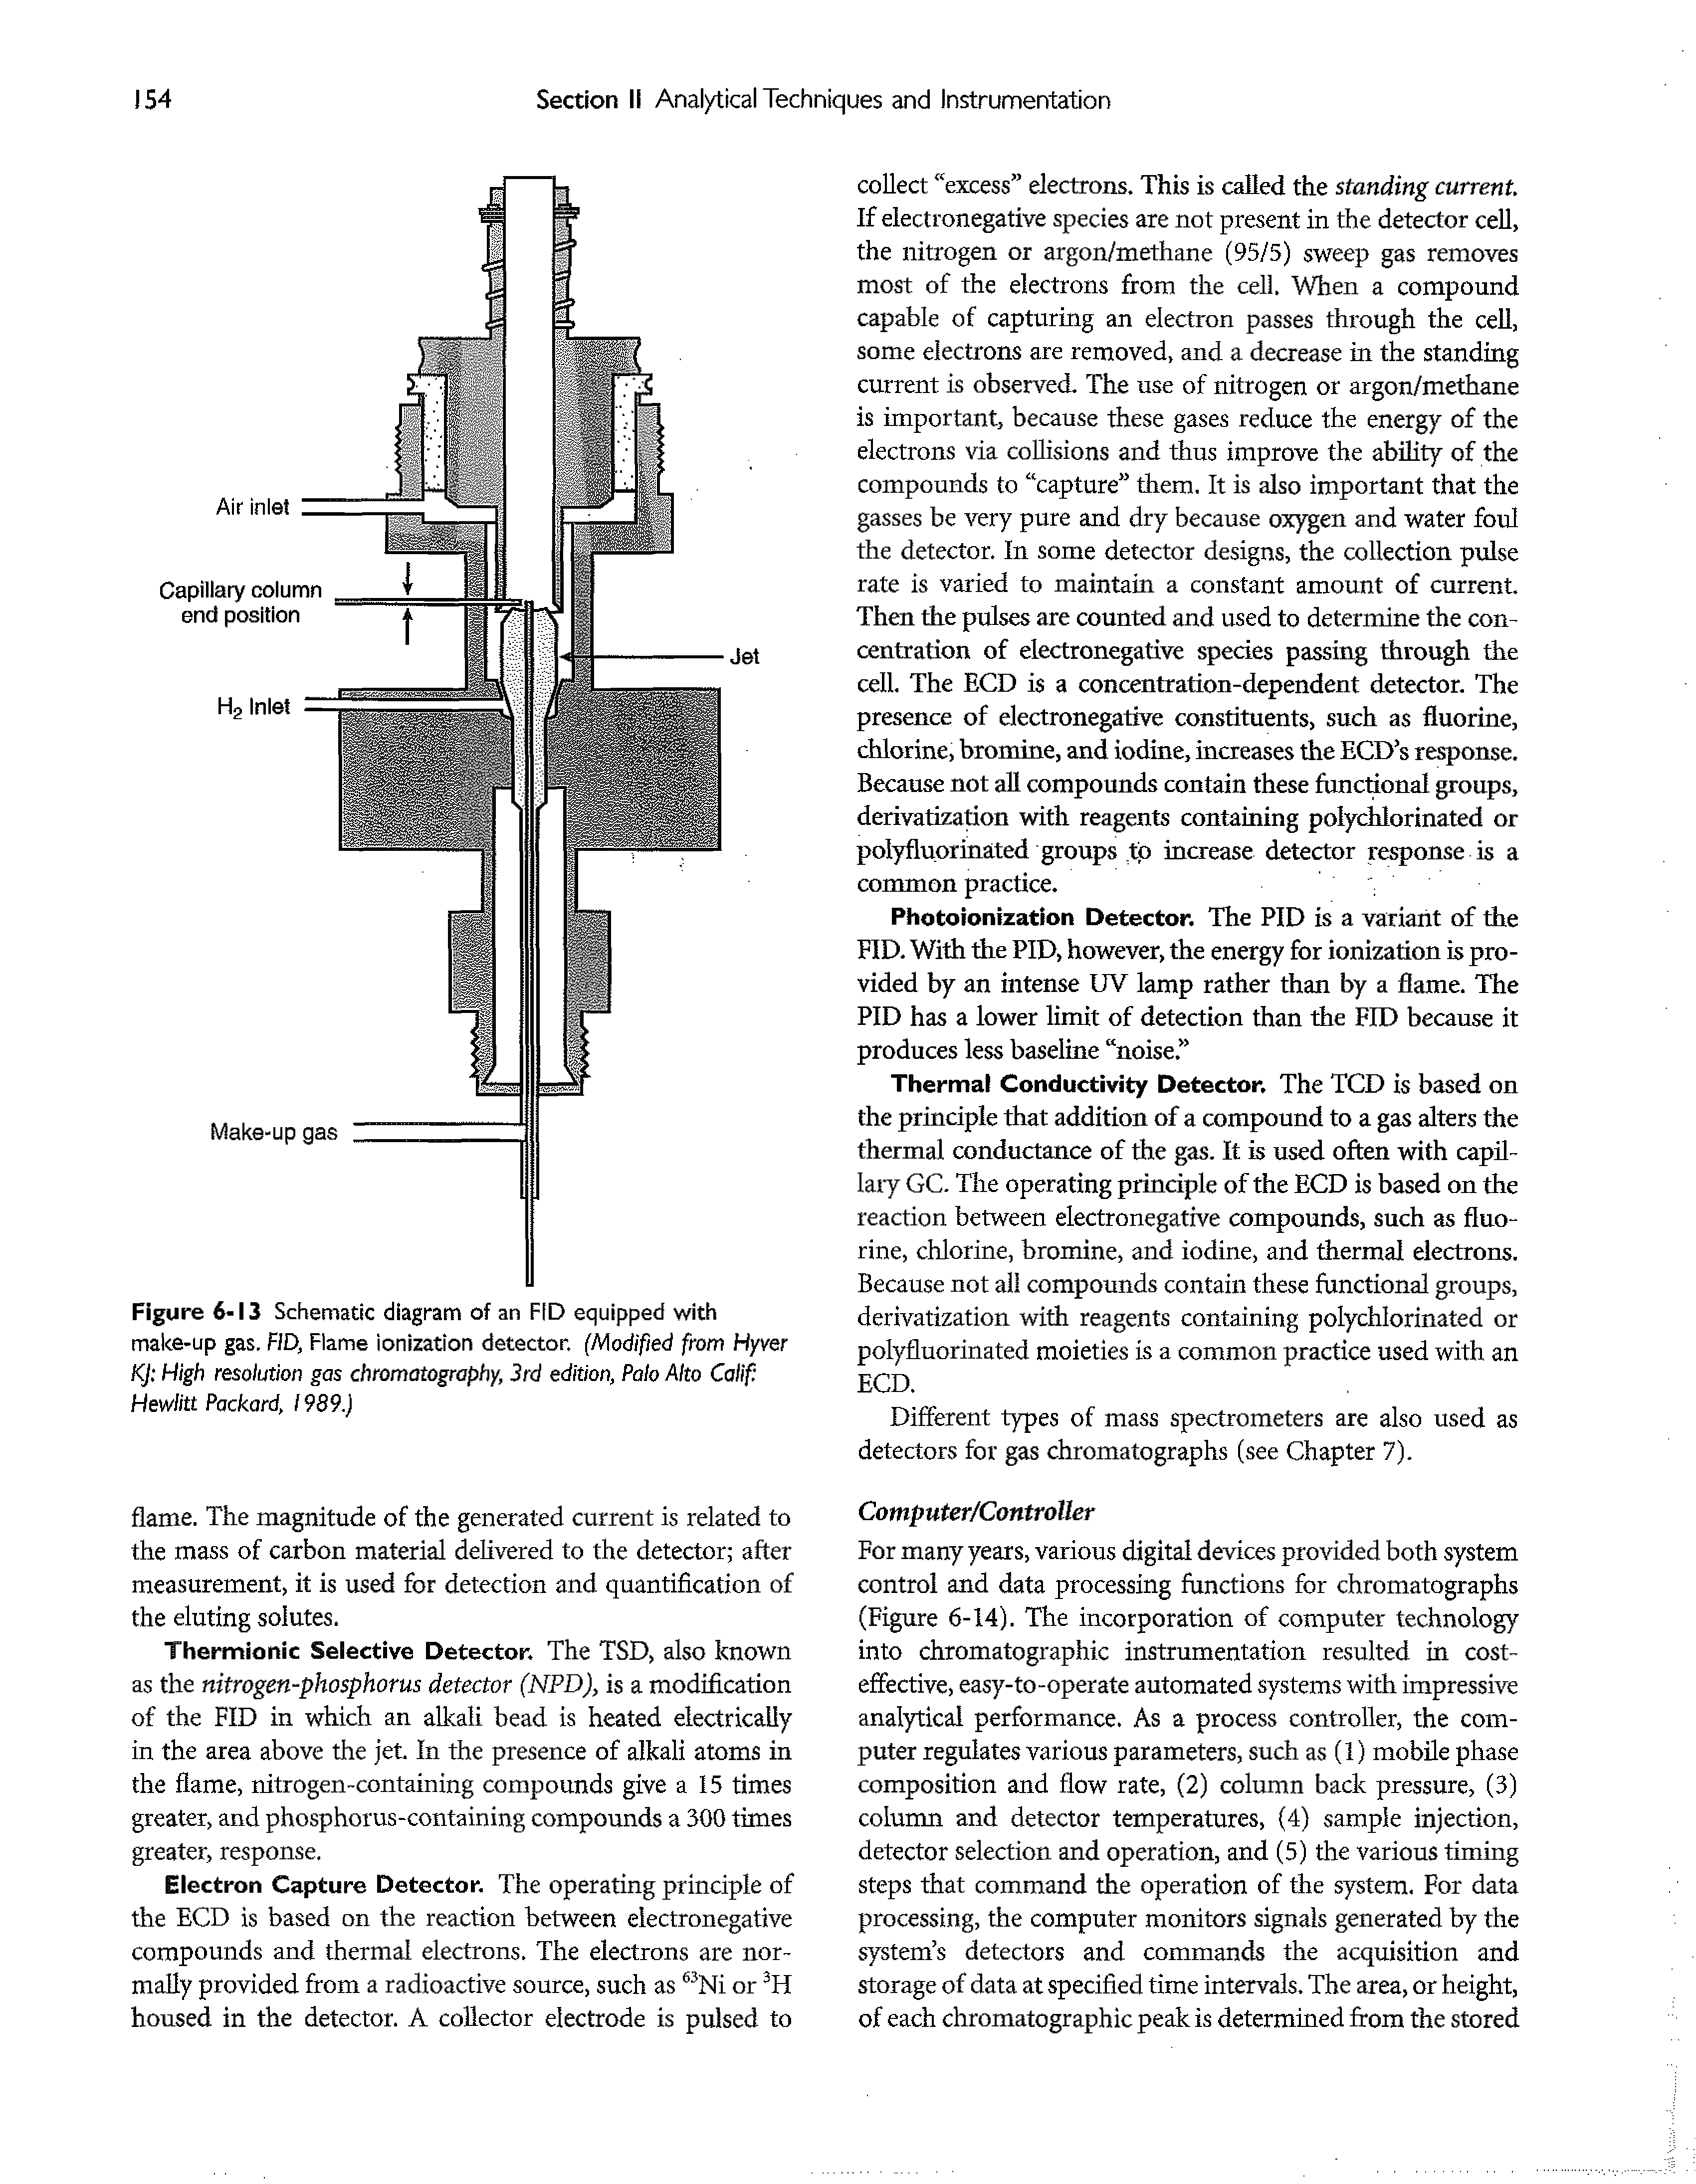 Figure 6-13 Schematic diagram of an FID equipped with make-up gas. FID, Flame ionization detector. (Modified from Hyver KJ High resolution gas chromatography, 3rd edition, Palo Alto Calif Hewlitt Packard, 1989.)...